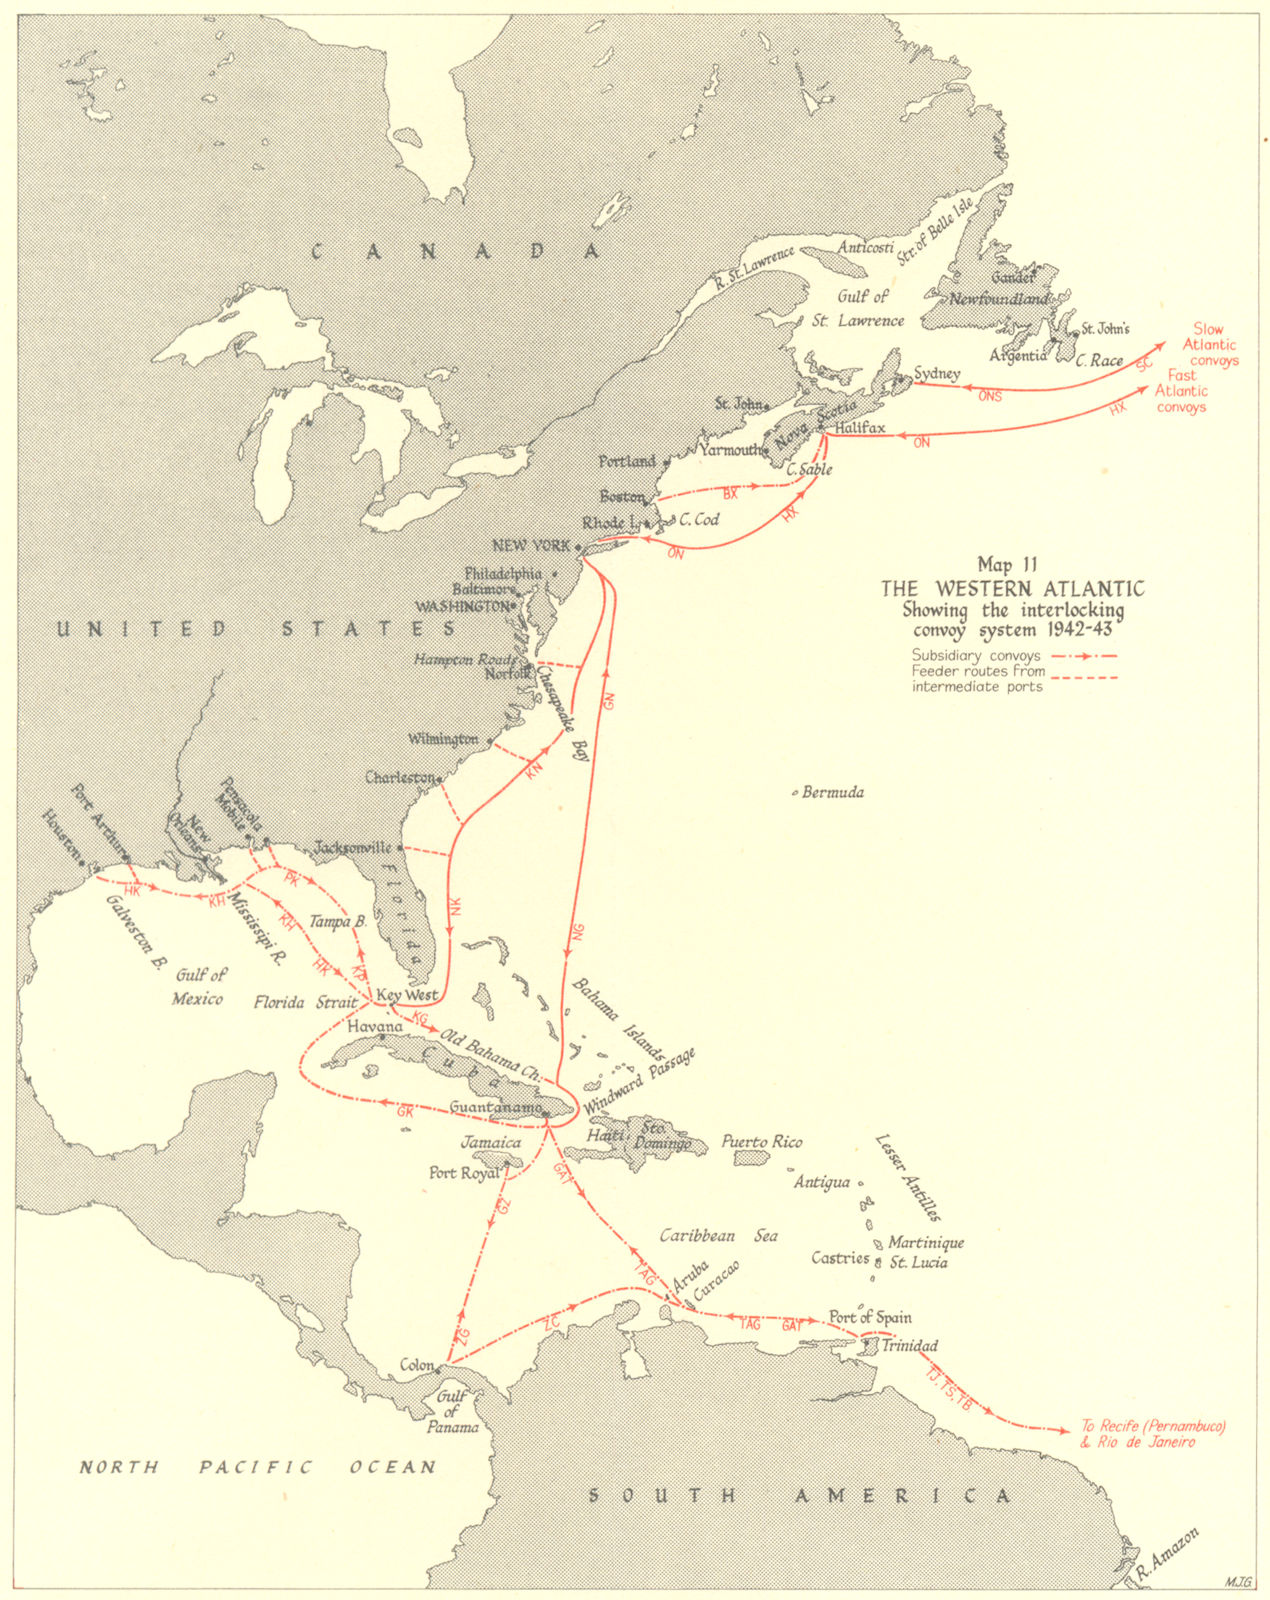 BATTLE OF THE ATLANTIC. Western Atlantic. Convoy system 1942-43 1956 old map